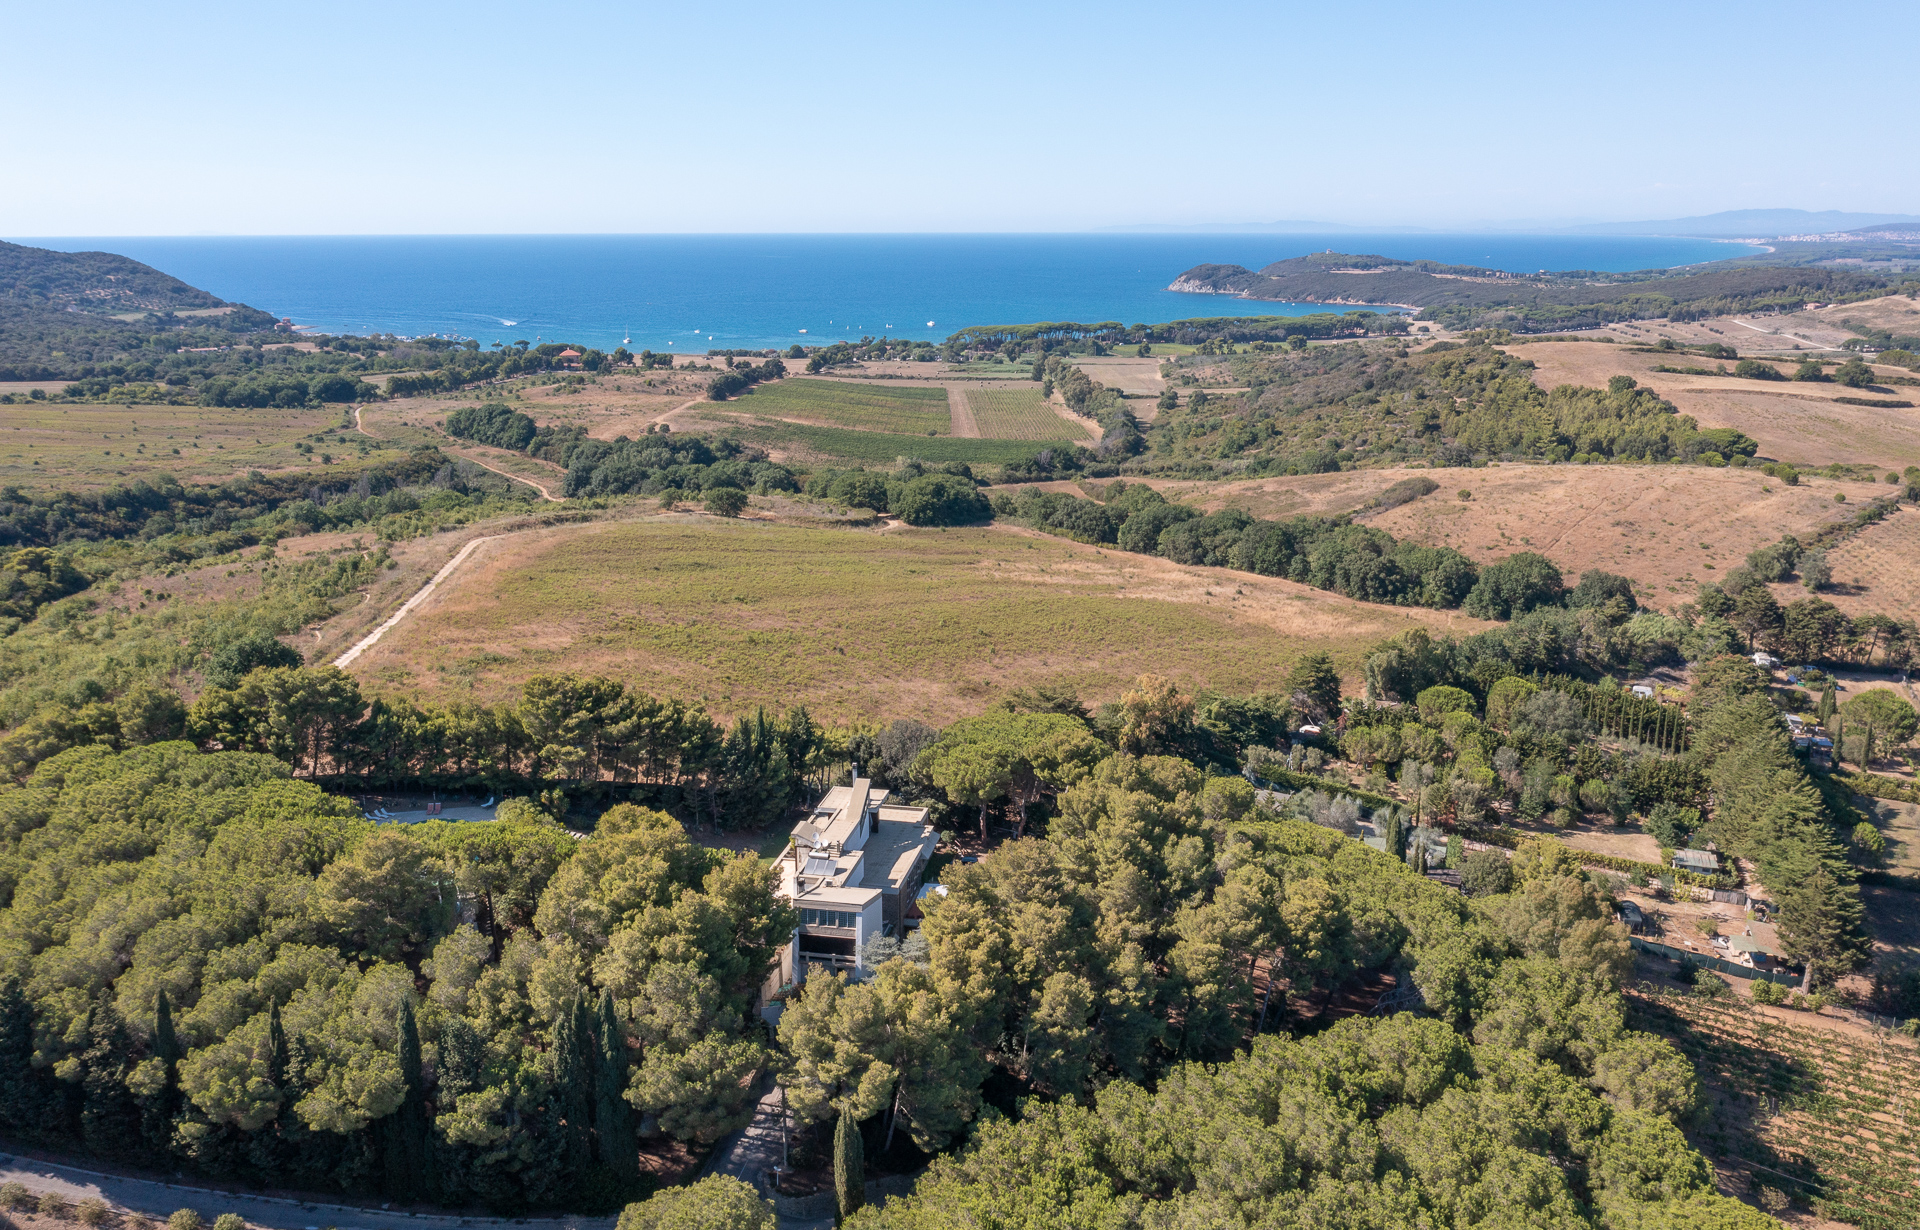 A birds eye view of the gulf of Baratti, with plains and and trees everywhere.